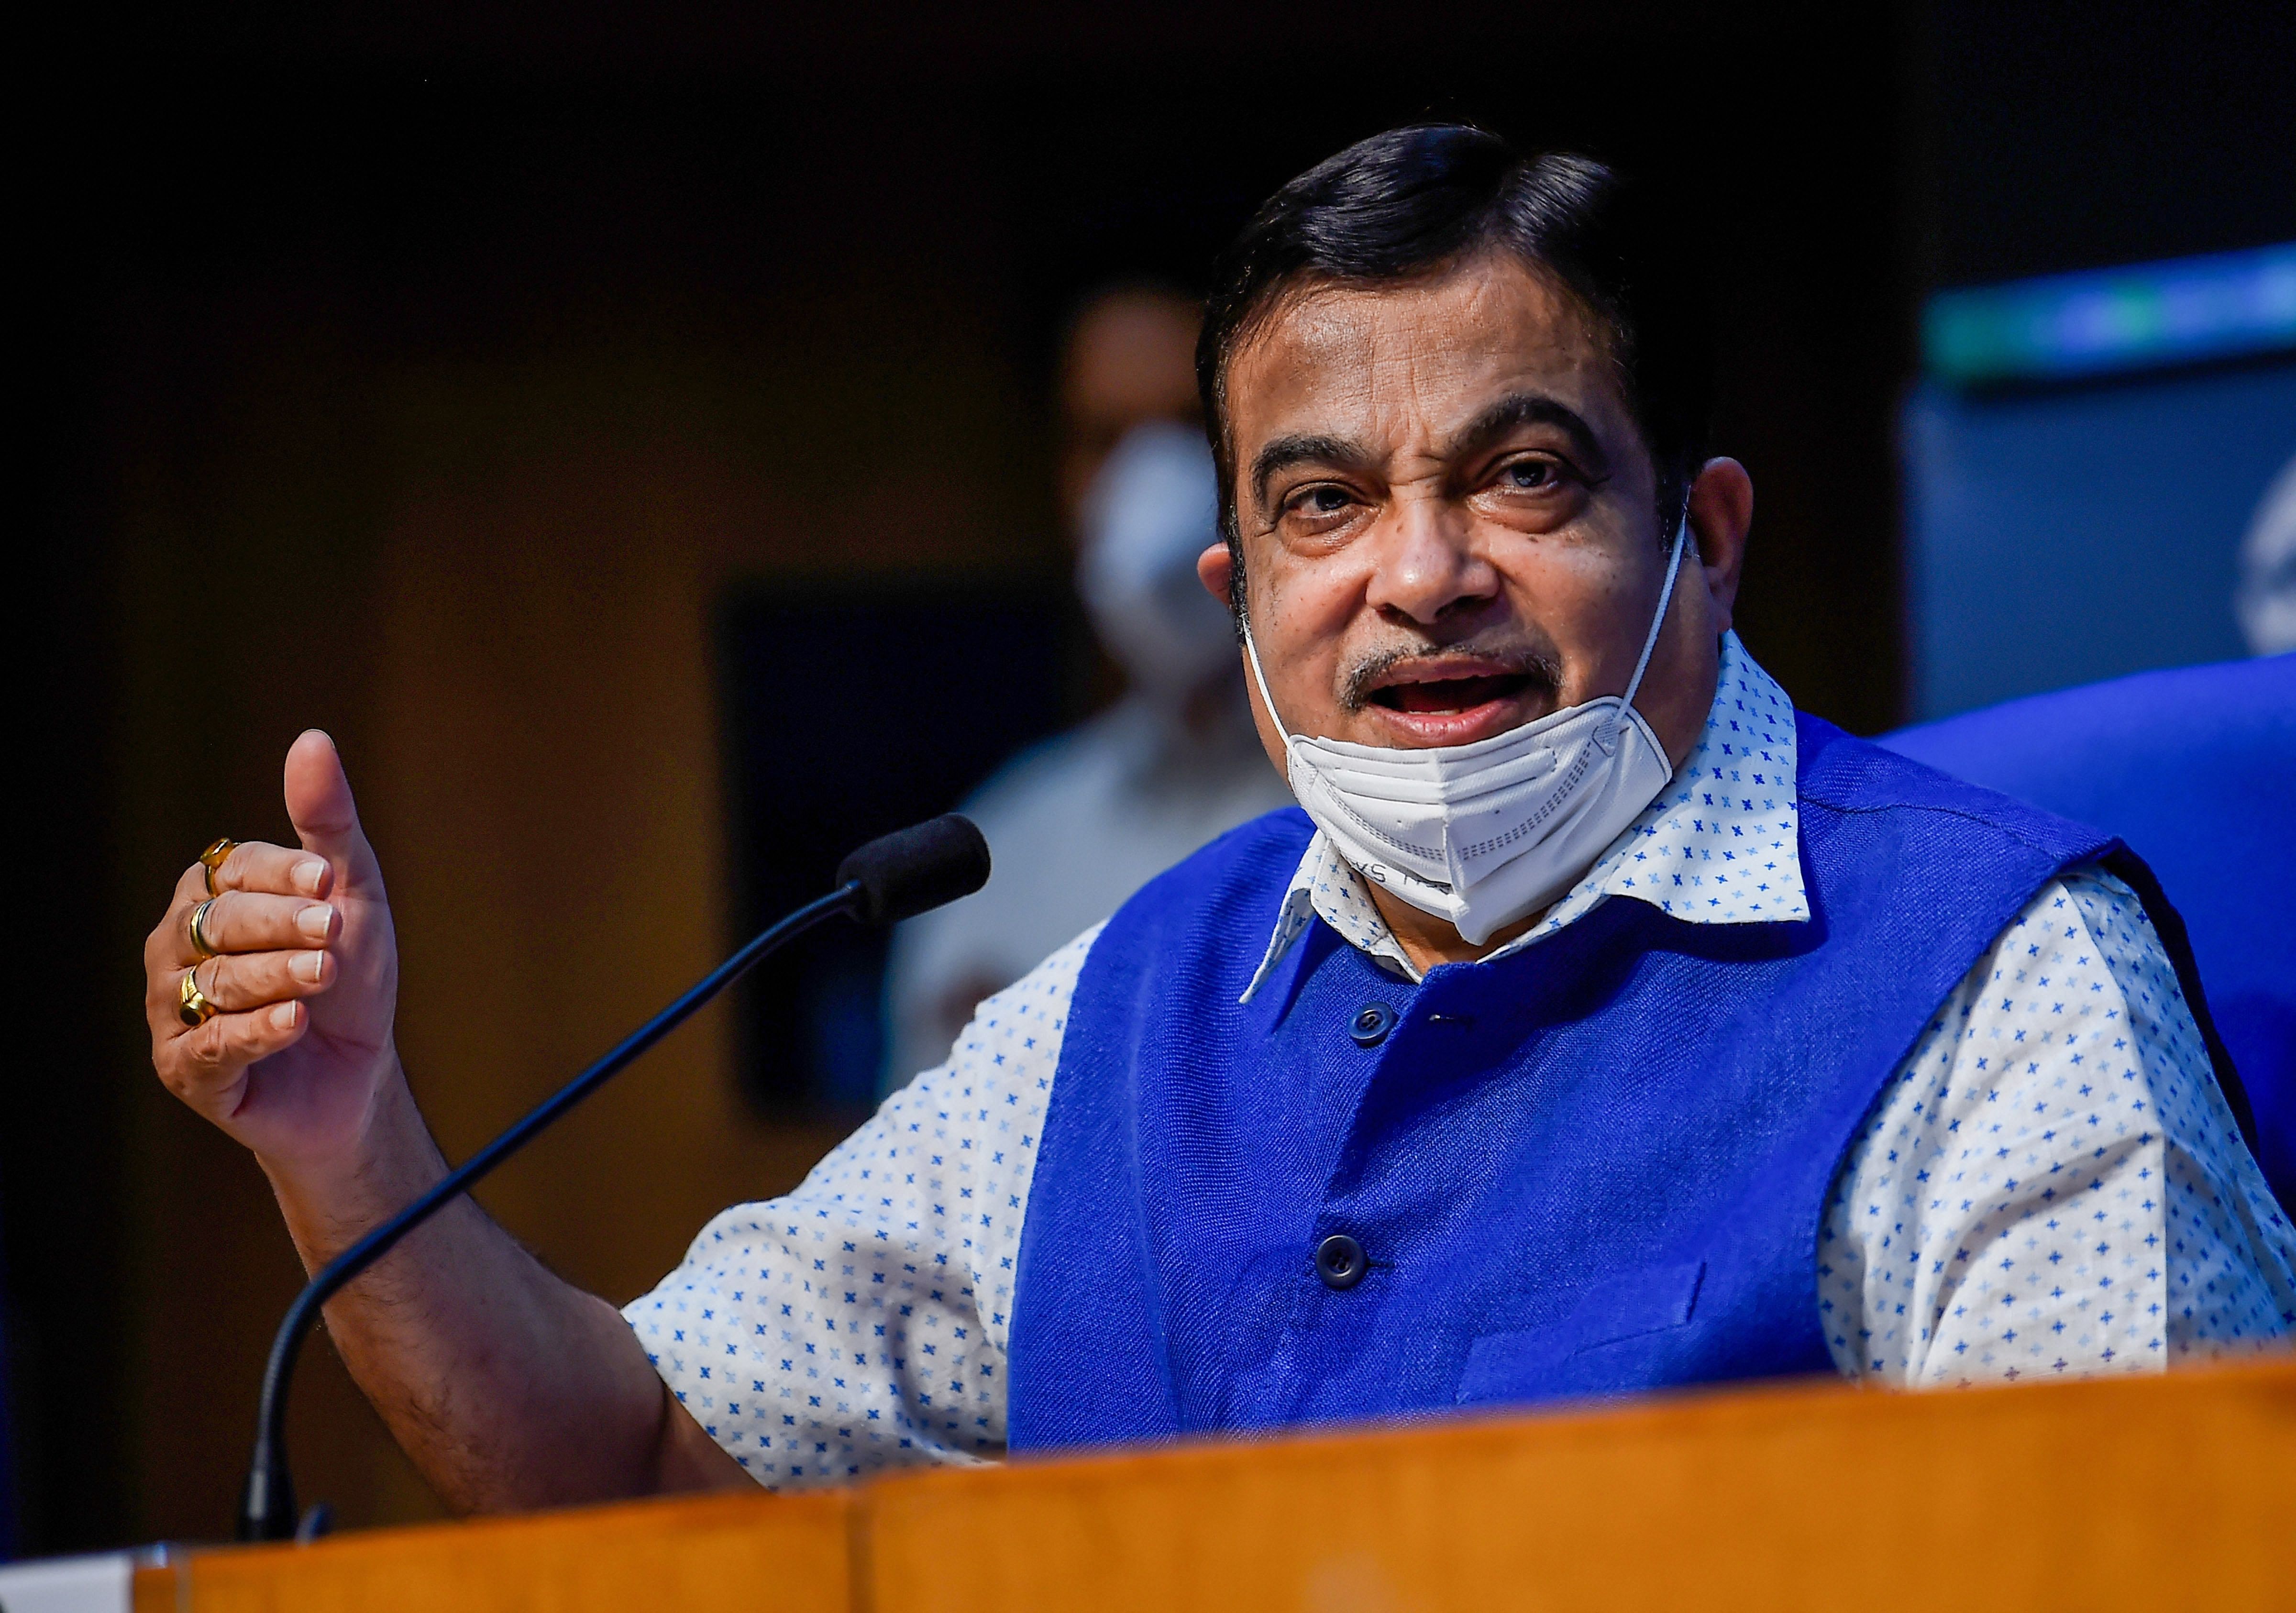 Union Minister Nitin Gadkari further said there is a need to upgrade technology, which will result in employment generation. Credit: PTI Photo